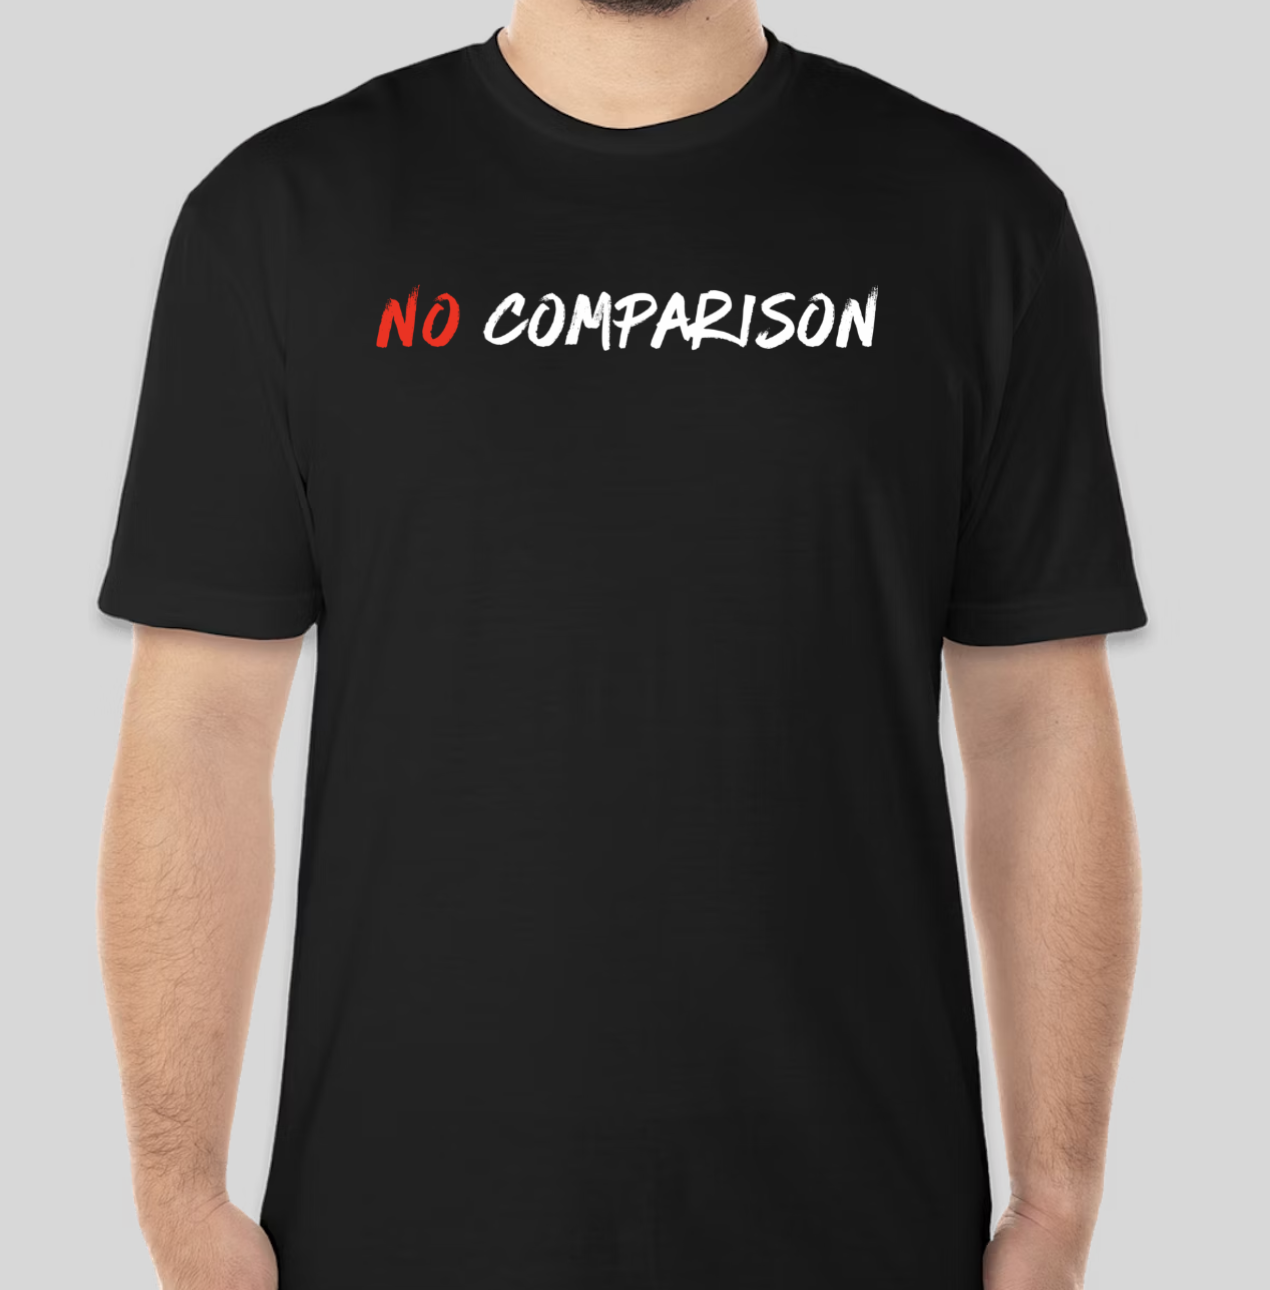 The No Comparison t-shirt features the words no comparison displayed in a raw and dramatic font. The classic BHS logo is applied to the back of the t-shirt.